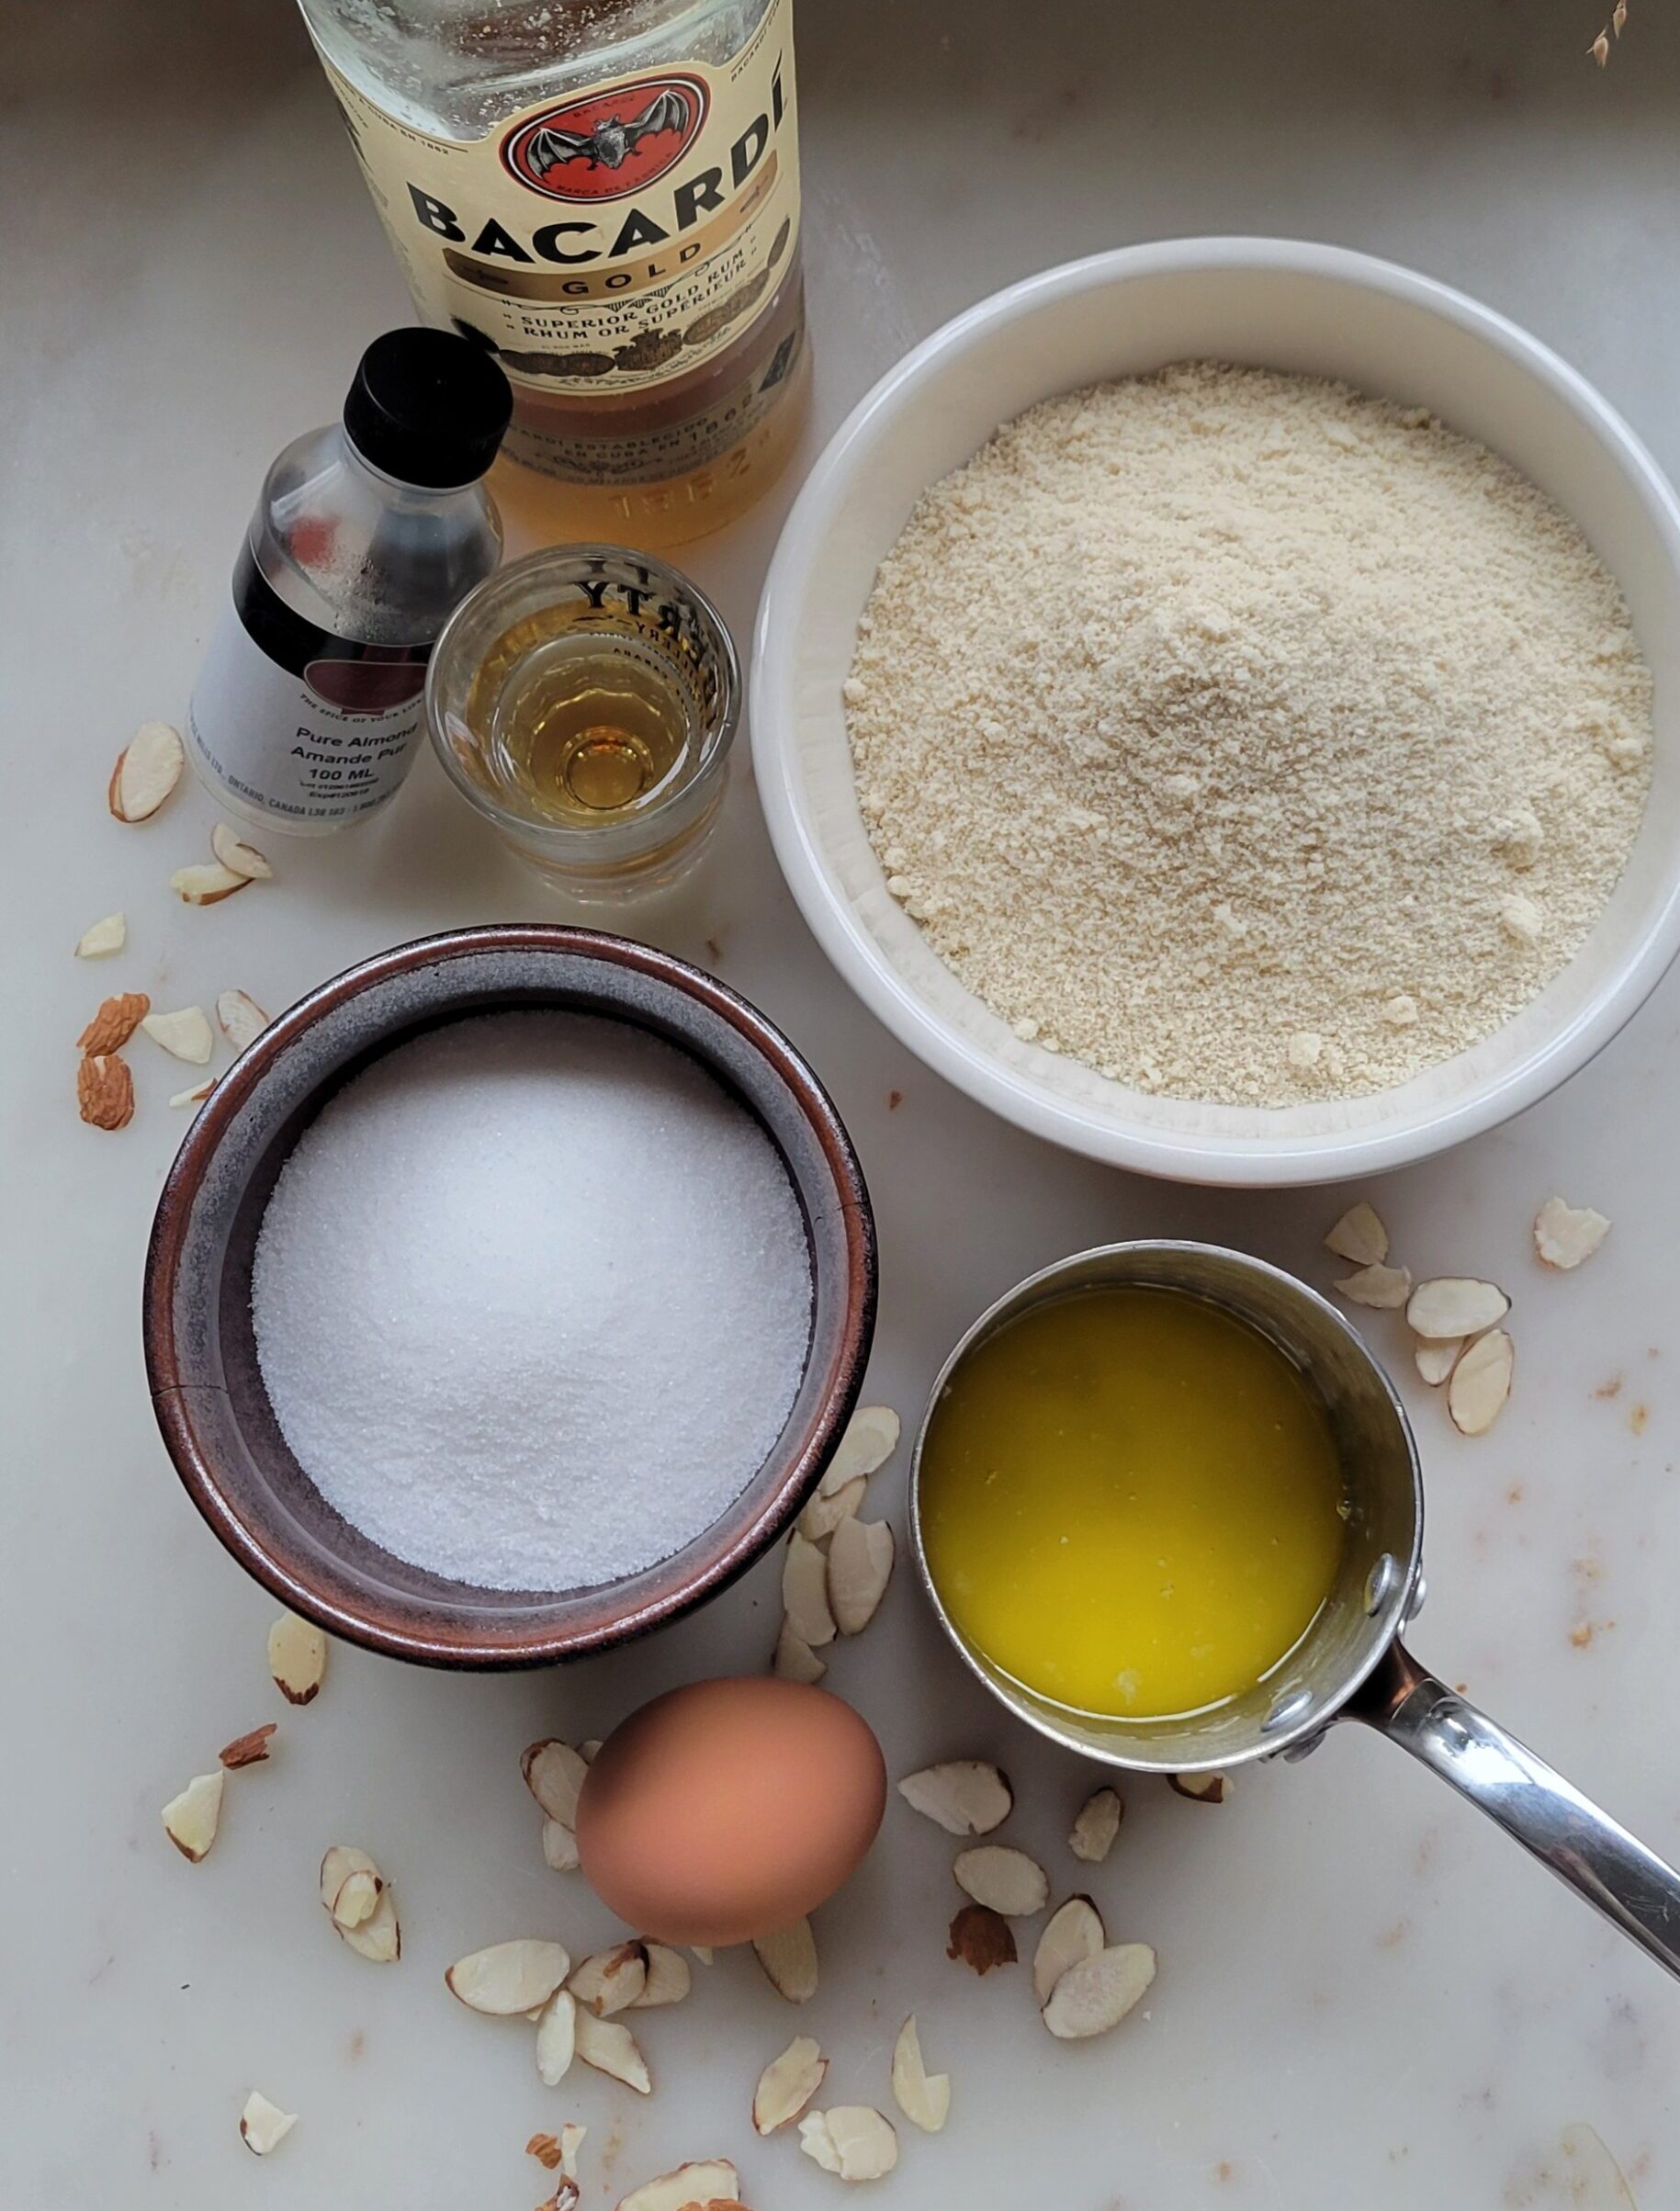 The ingredients needed to make the almond Frangipane for Almond Croissant Cookies on the counter.